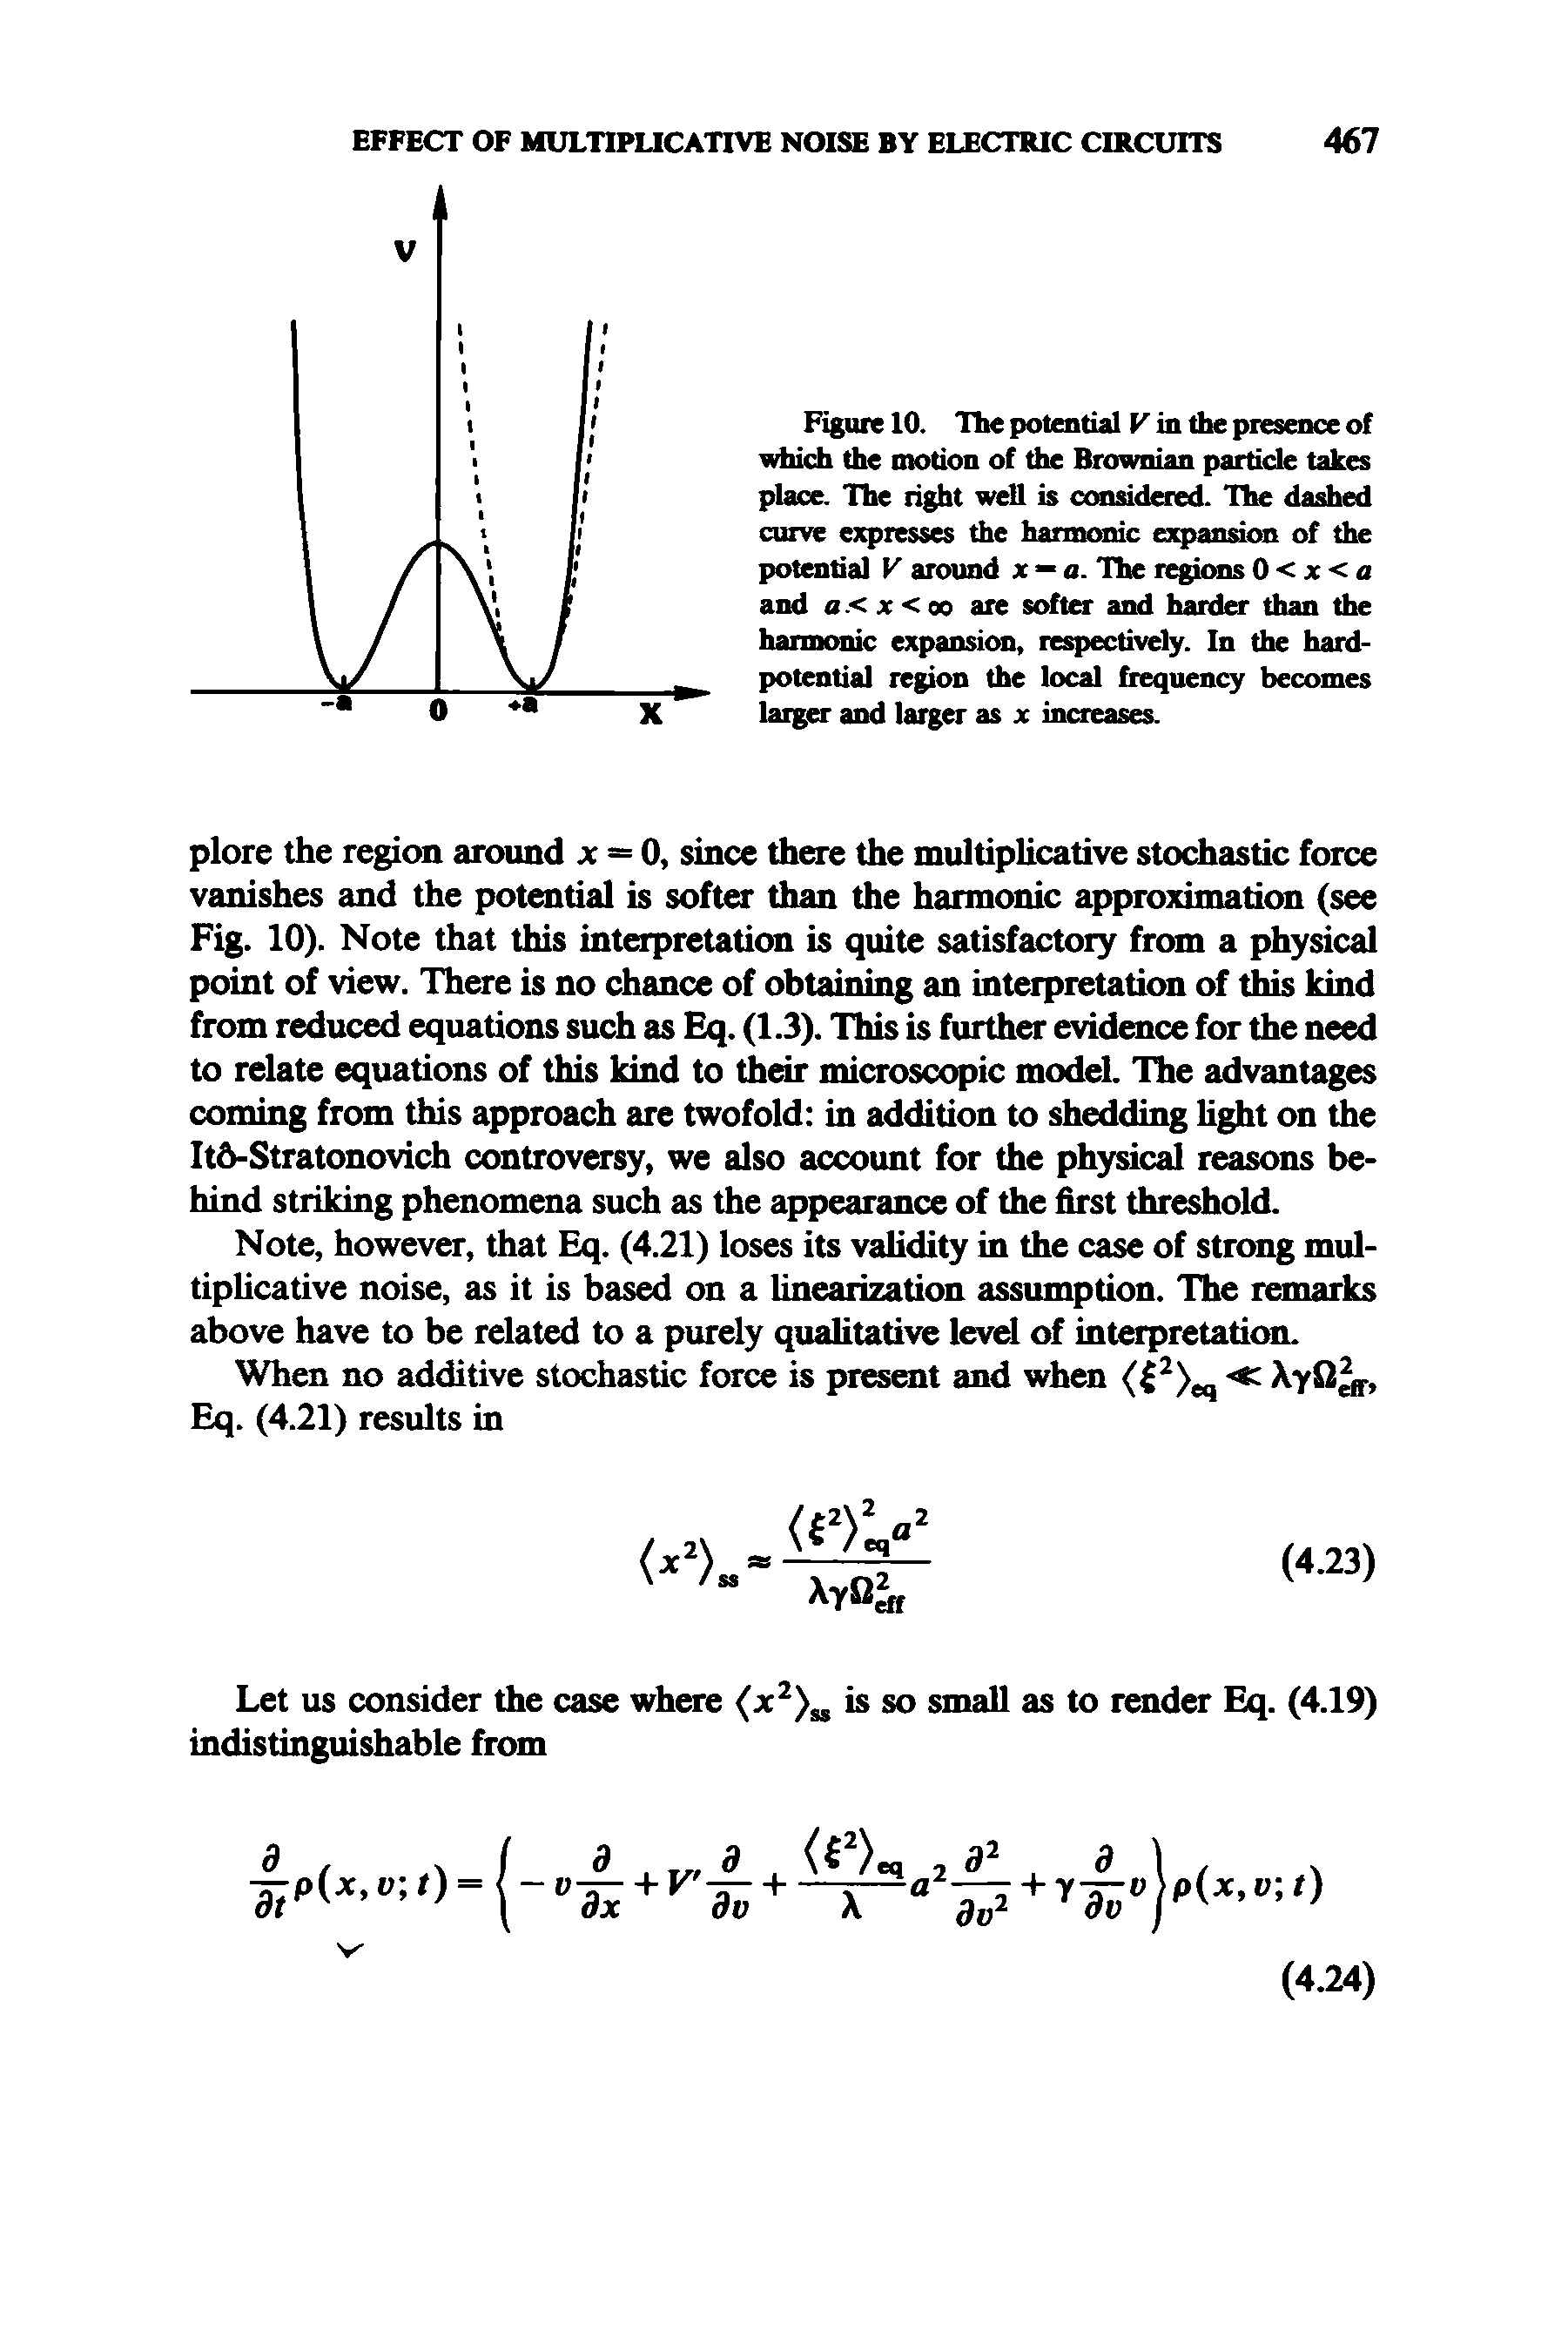 Figure 10. The potential F in the presence of lich the motion of the Brownian particle takes place. The right well is (xmsideted. The dashed curve expresses the harnuniic e q>anaon of the potential V around x a. The r ions 0 < x < a and a.< x<oo are softer and harder than the harmonic expansion, respectively. In the hard-potential region the local frequency becomes larger and larger as x increases.